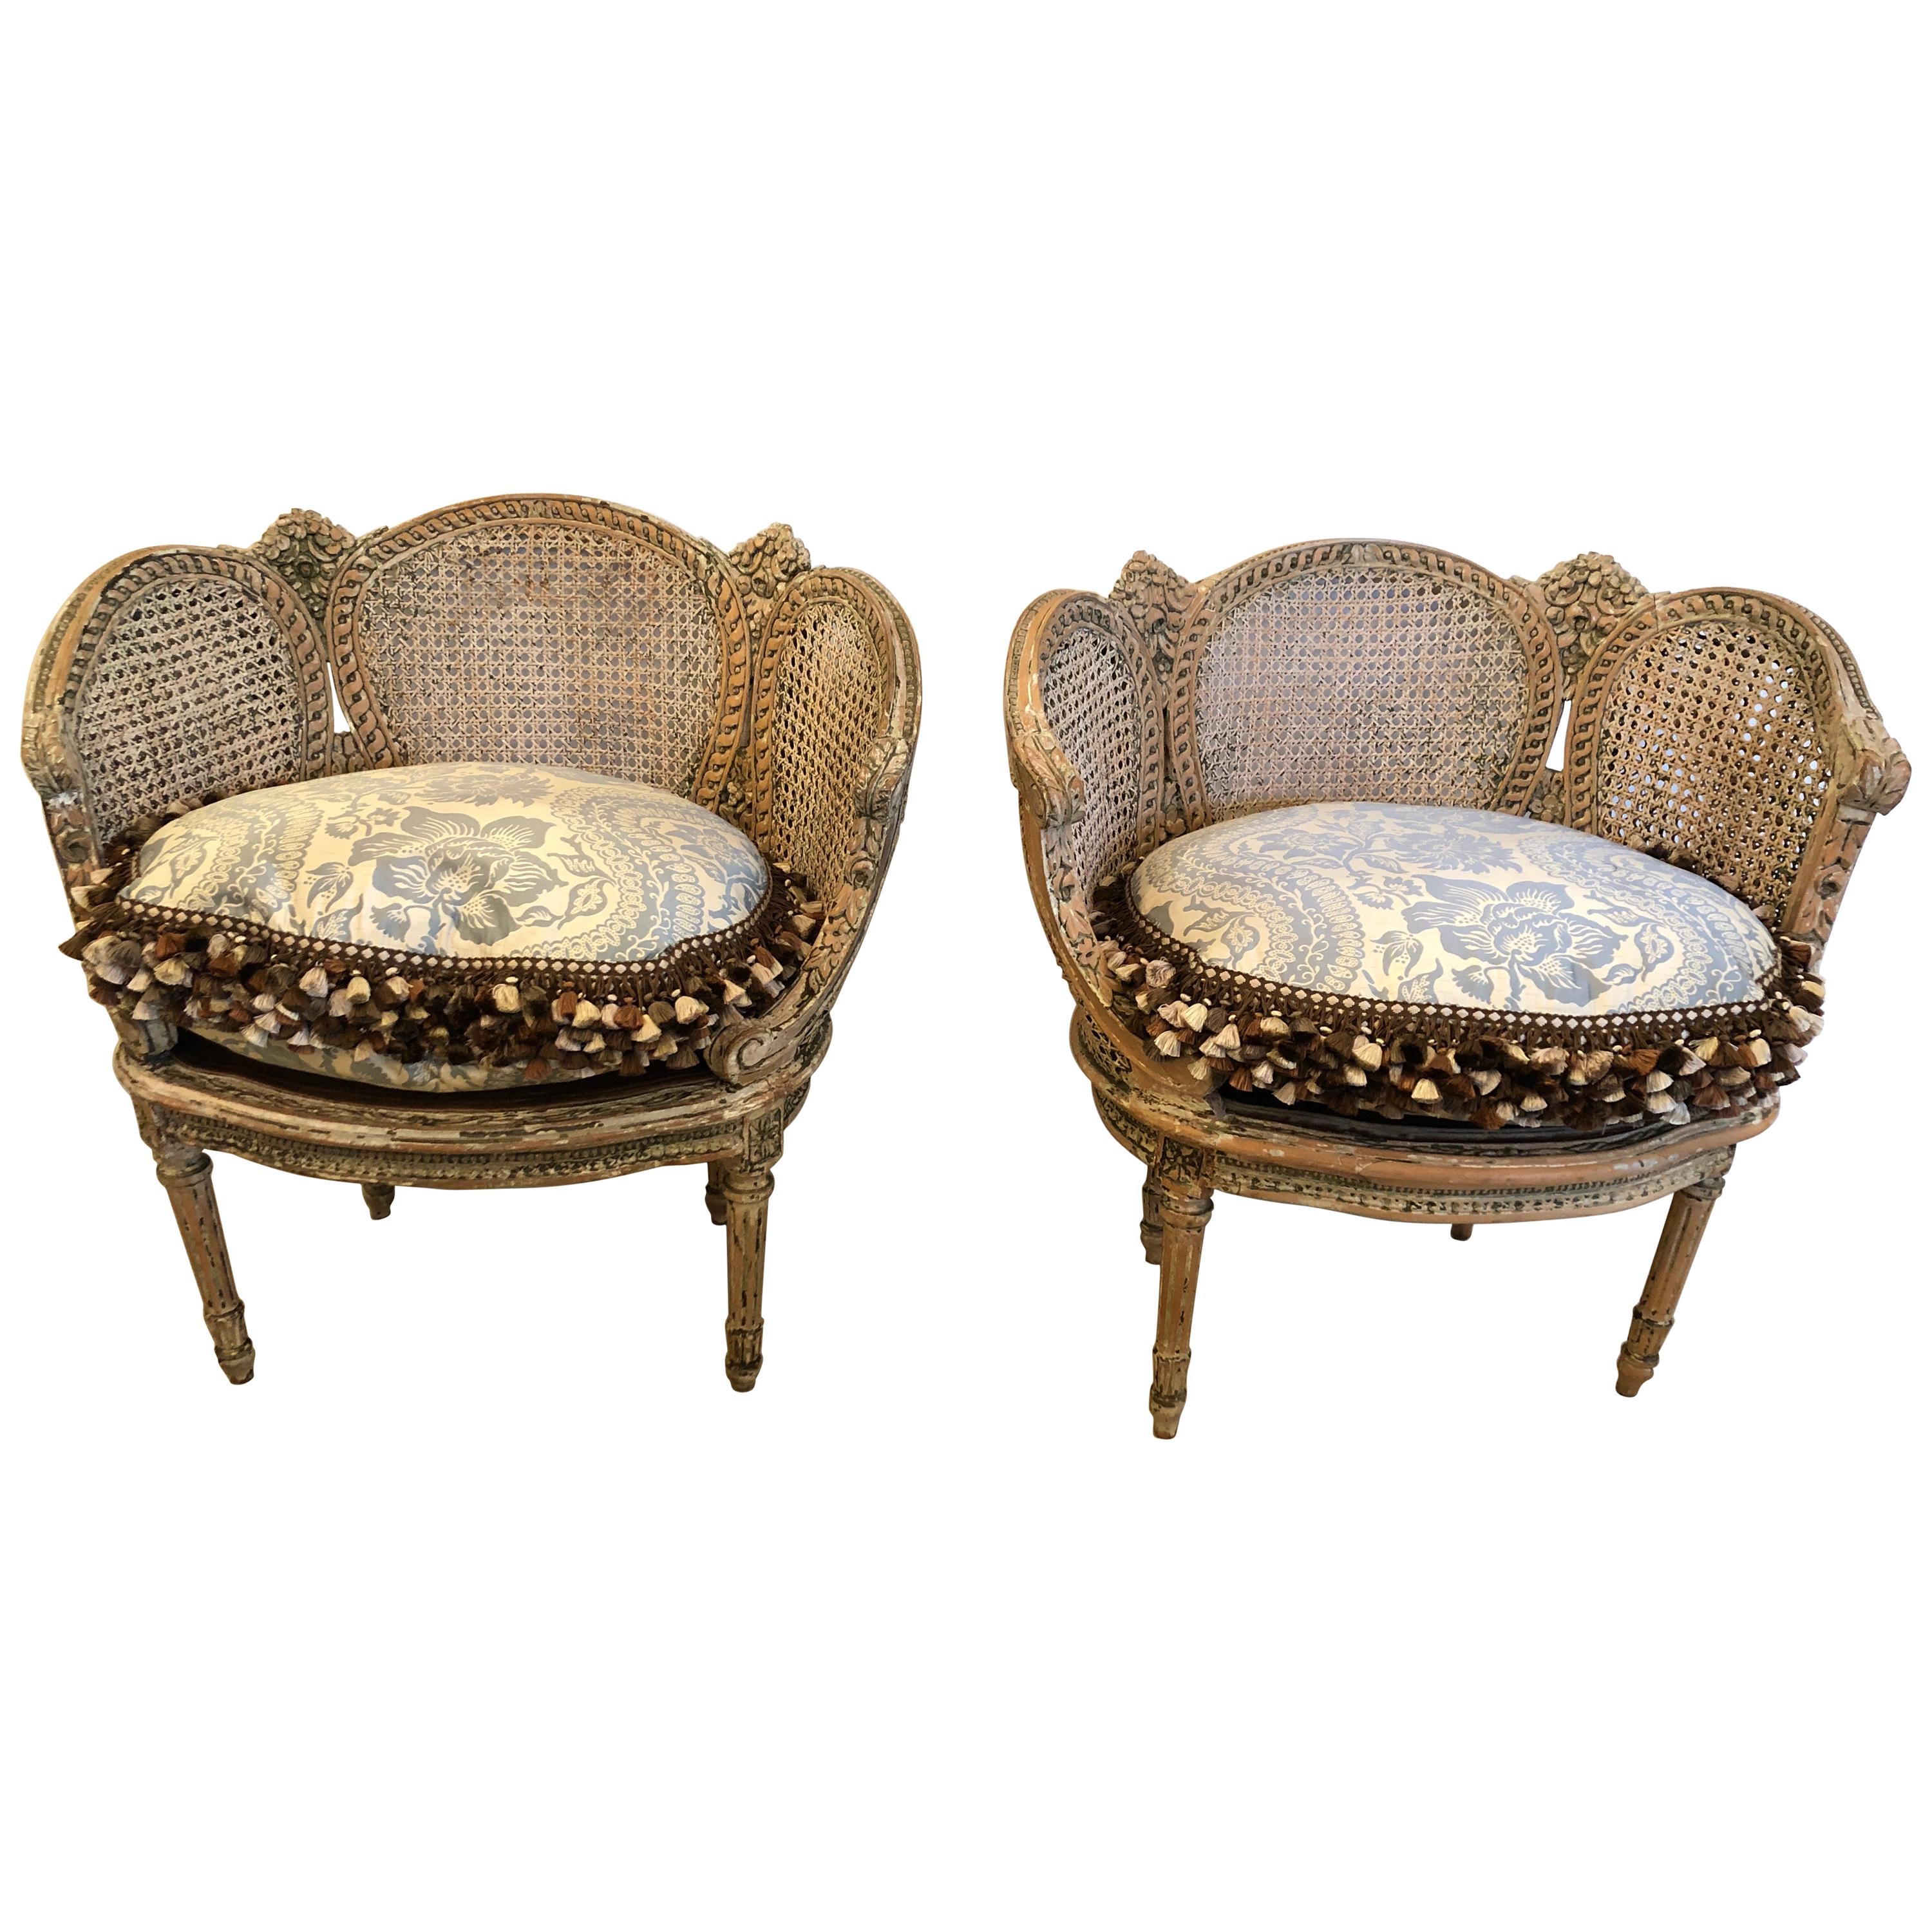 Fit for a Princess Pair of Louis XVI Painted Carved Wood and Double Caned Chairs